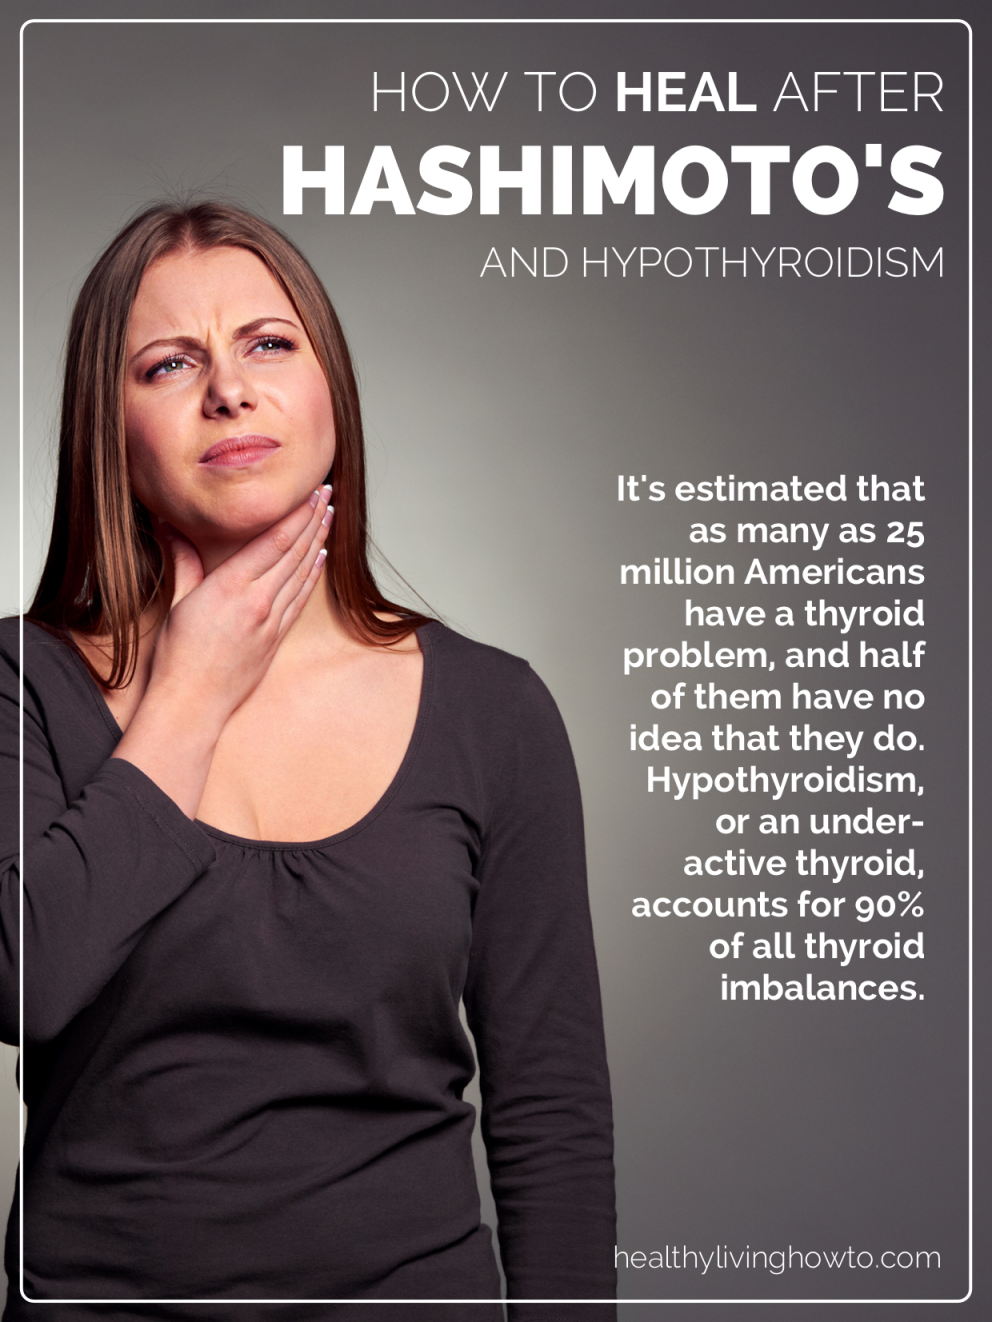 How To Heal After Hashimoto's And Hypothyroidism | healthylivinghowto.com